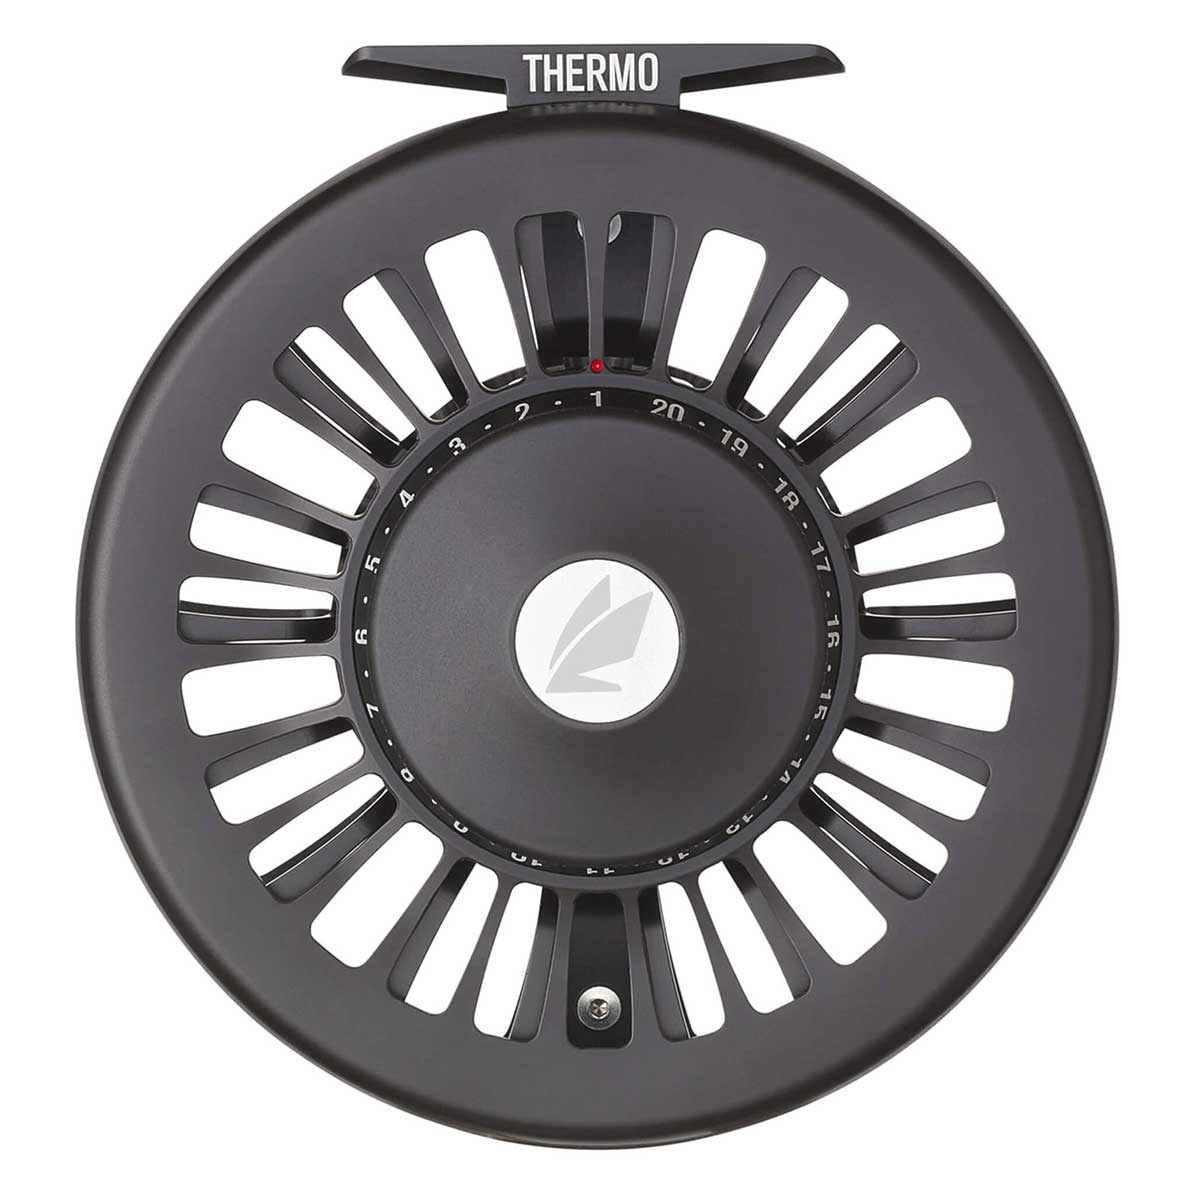 Sage Thermo Saltwater Fly Fishing Reel - Rok Max